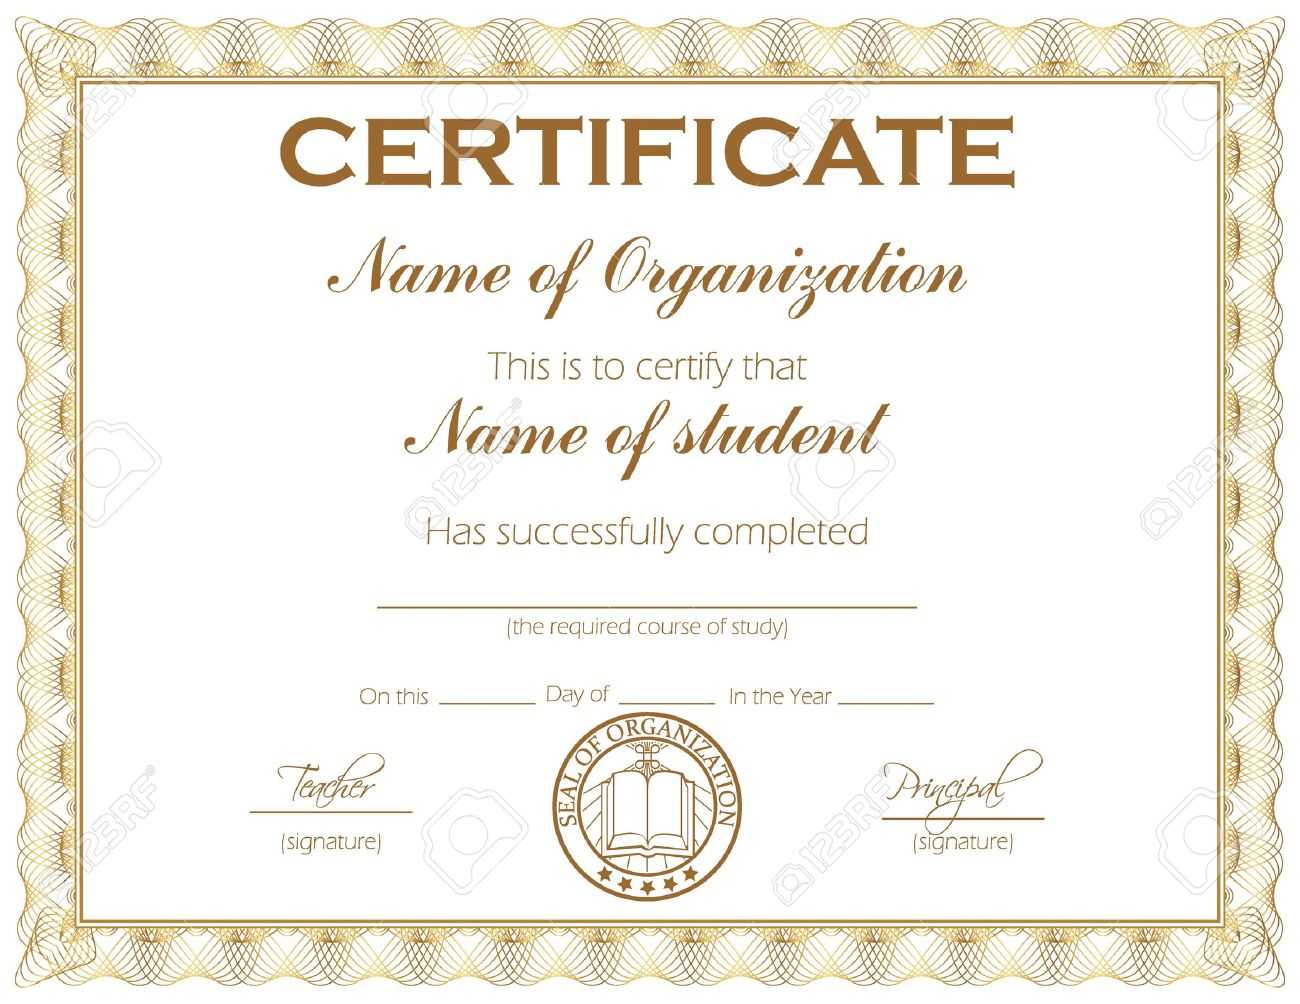 General Purpose Certificate Or Award With Sample Text That Can.. Inside Academic Award Certificate Template